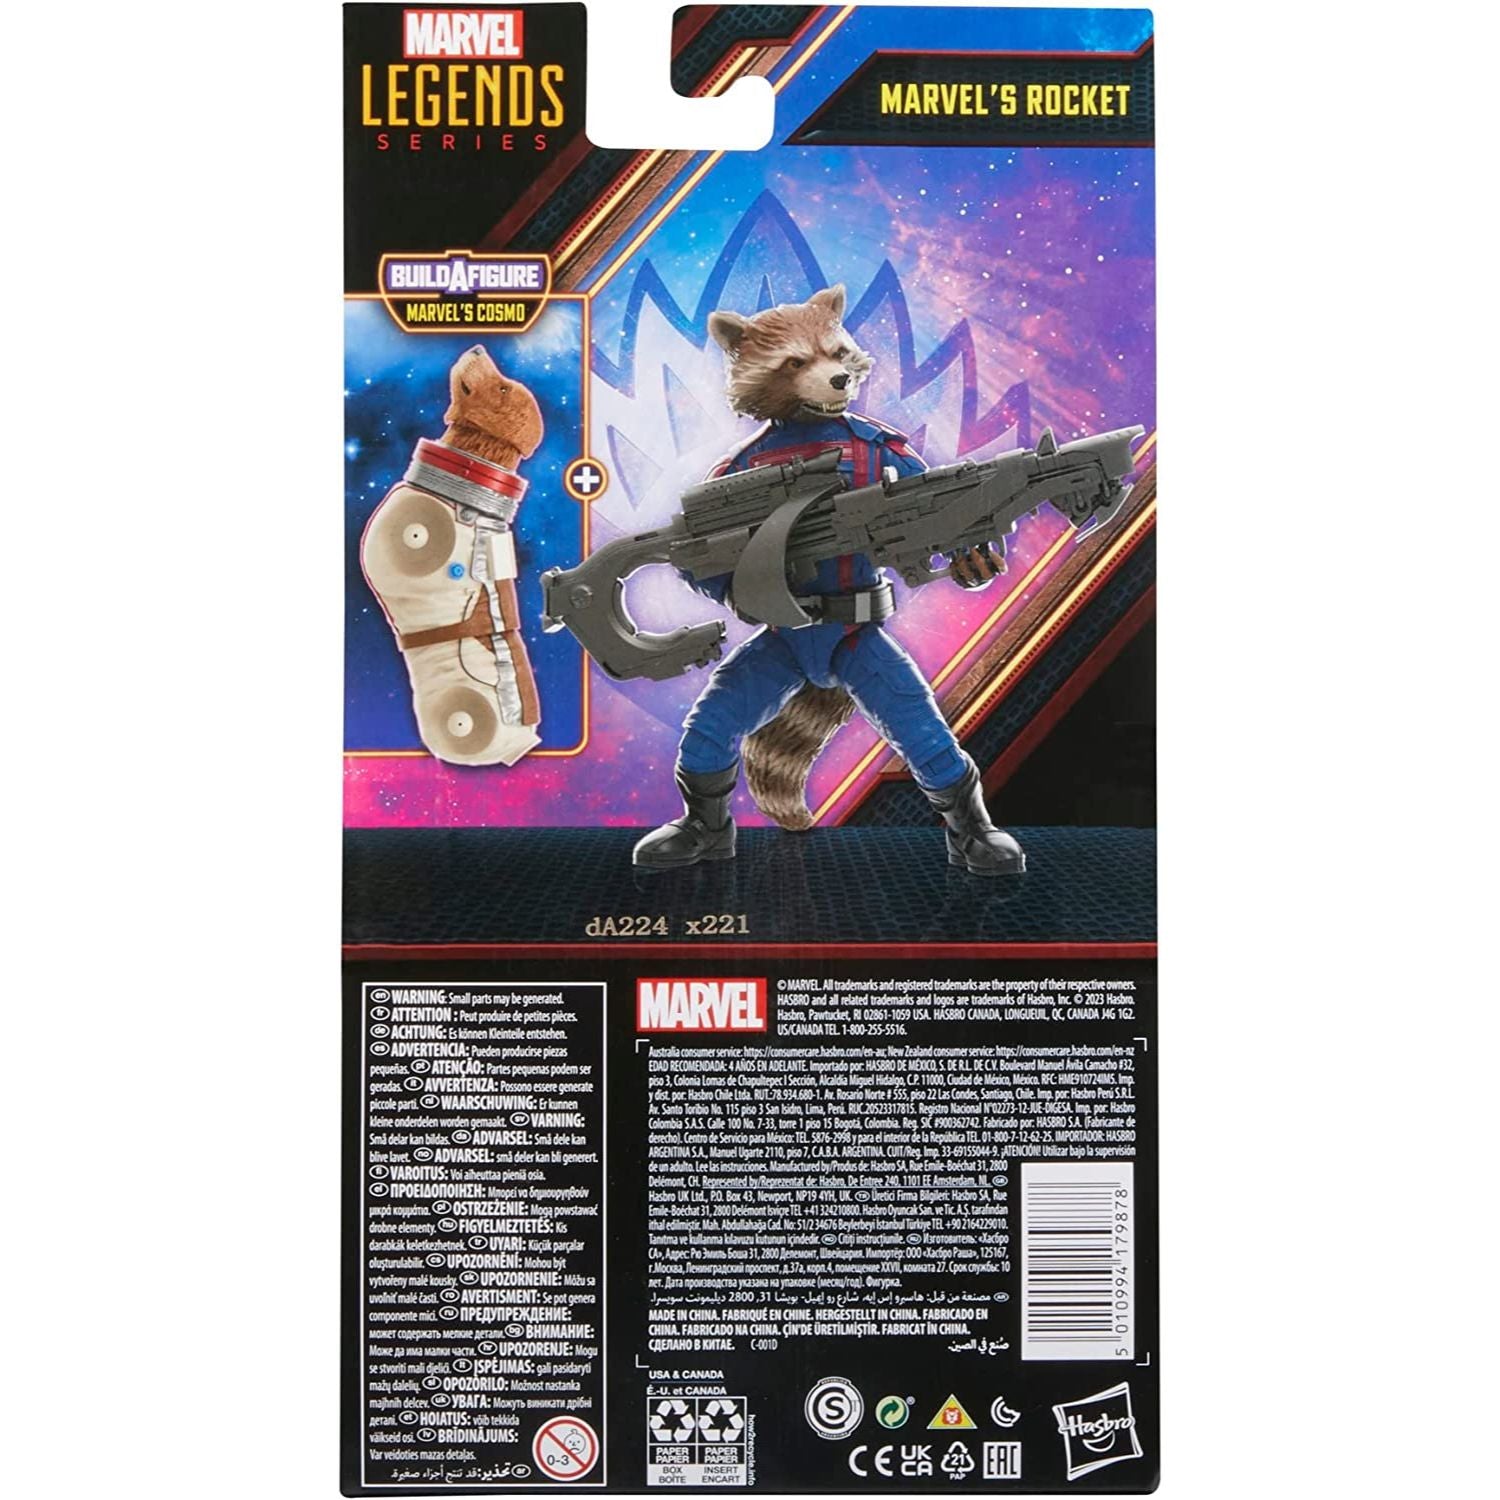 Guardians of The Galaxy Vol. 3 Marvel Legends Rocket 6-Inch Action Figure Toy in a box back view - Heretoserveyou